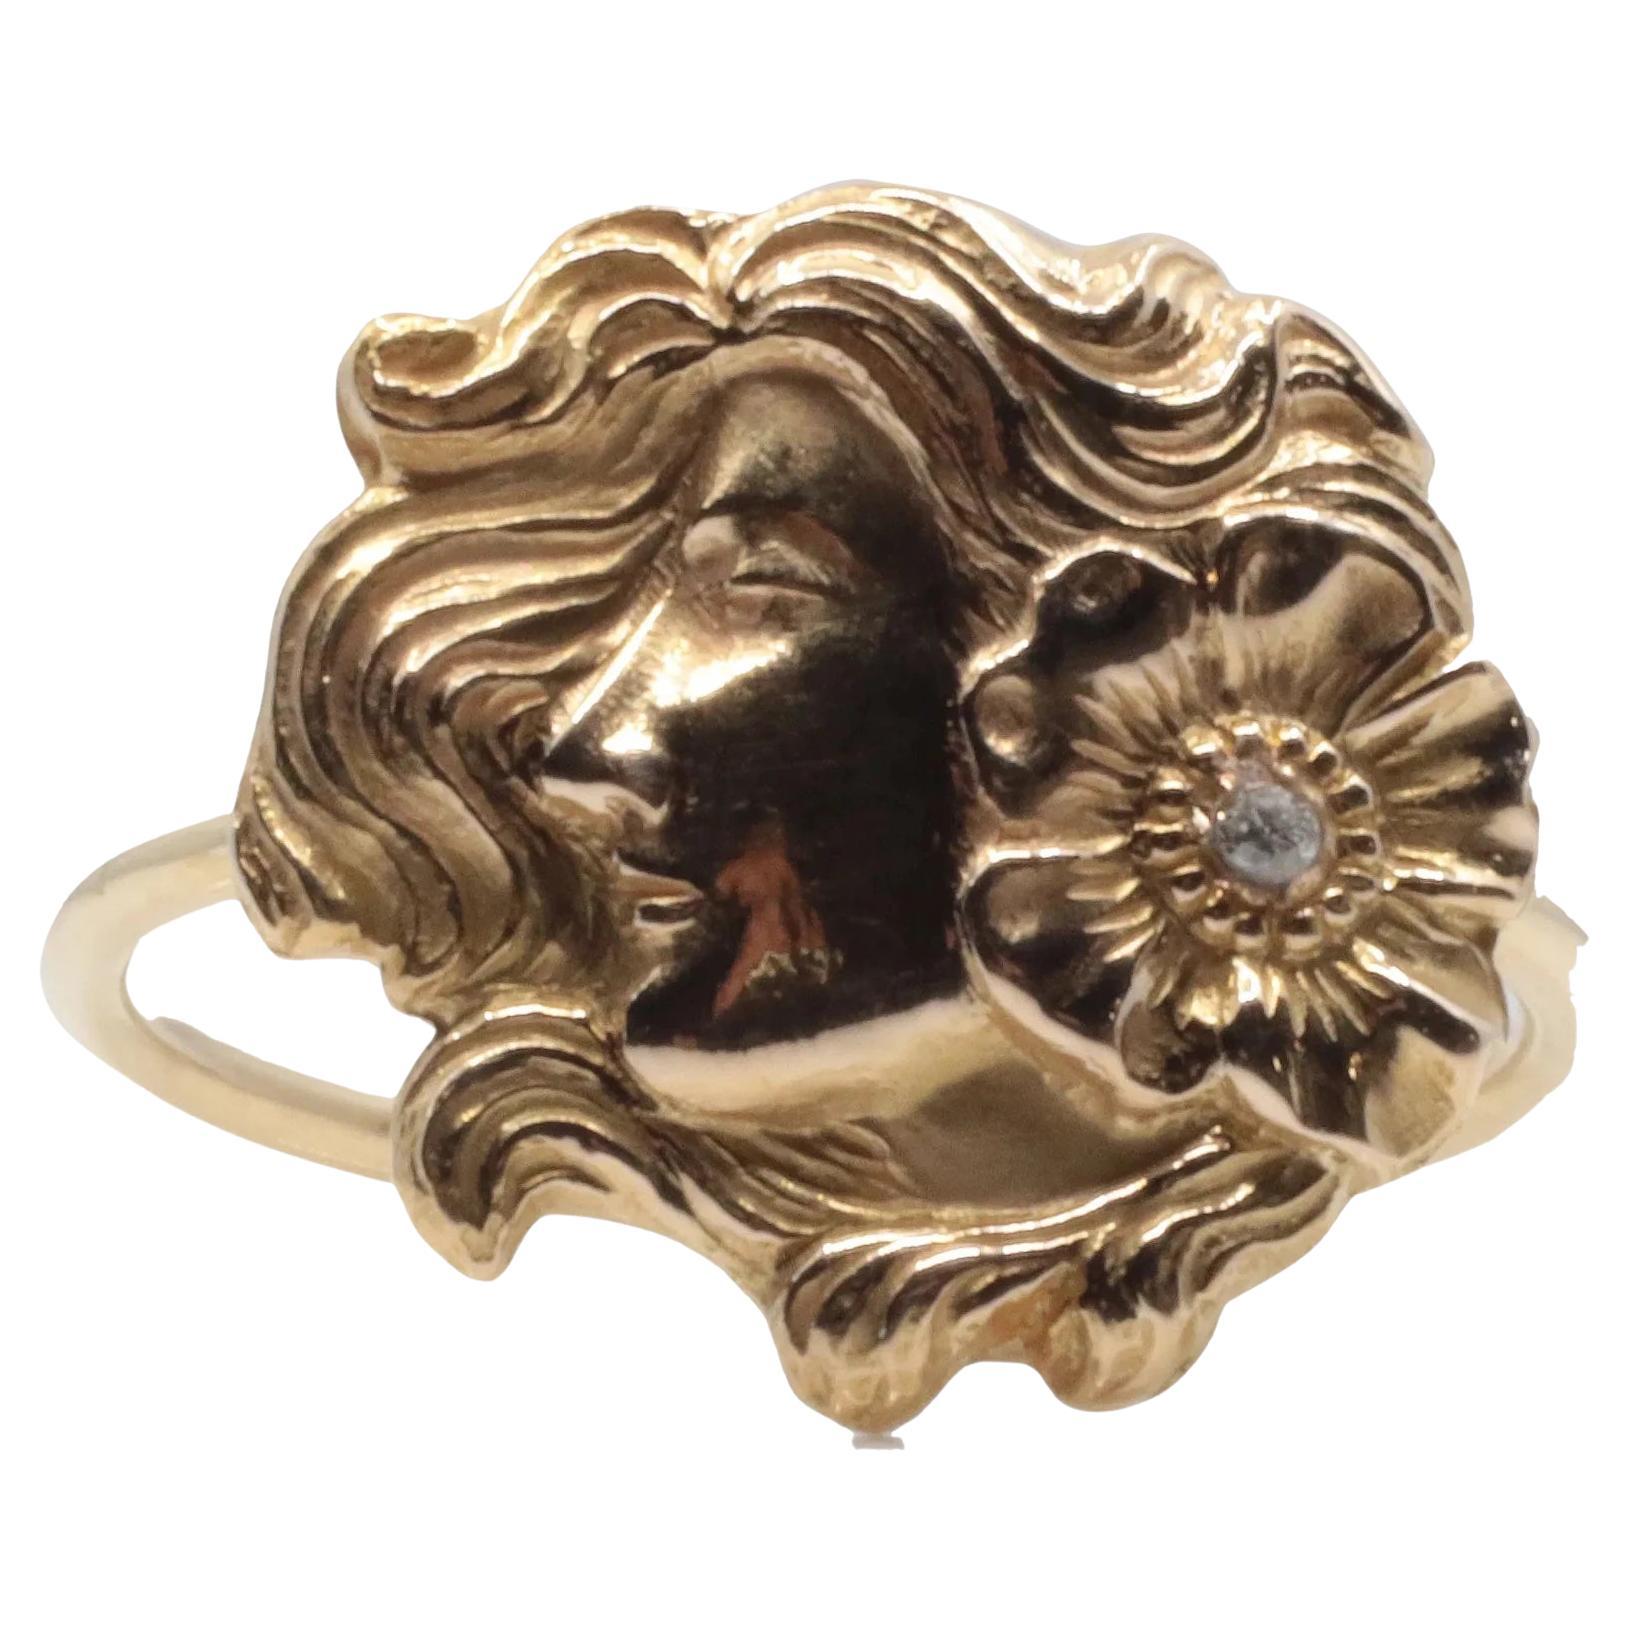 Figural Art Nouveau Woman with Diamond Flower Ring in 14K Gold